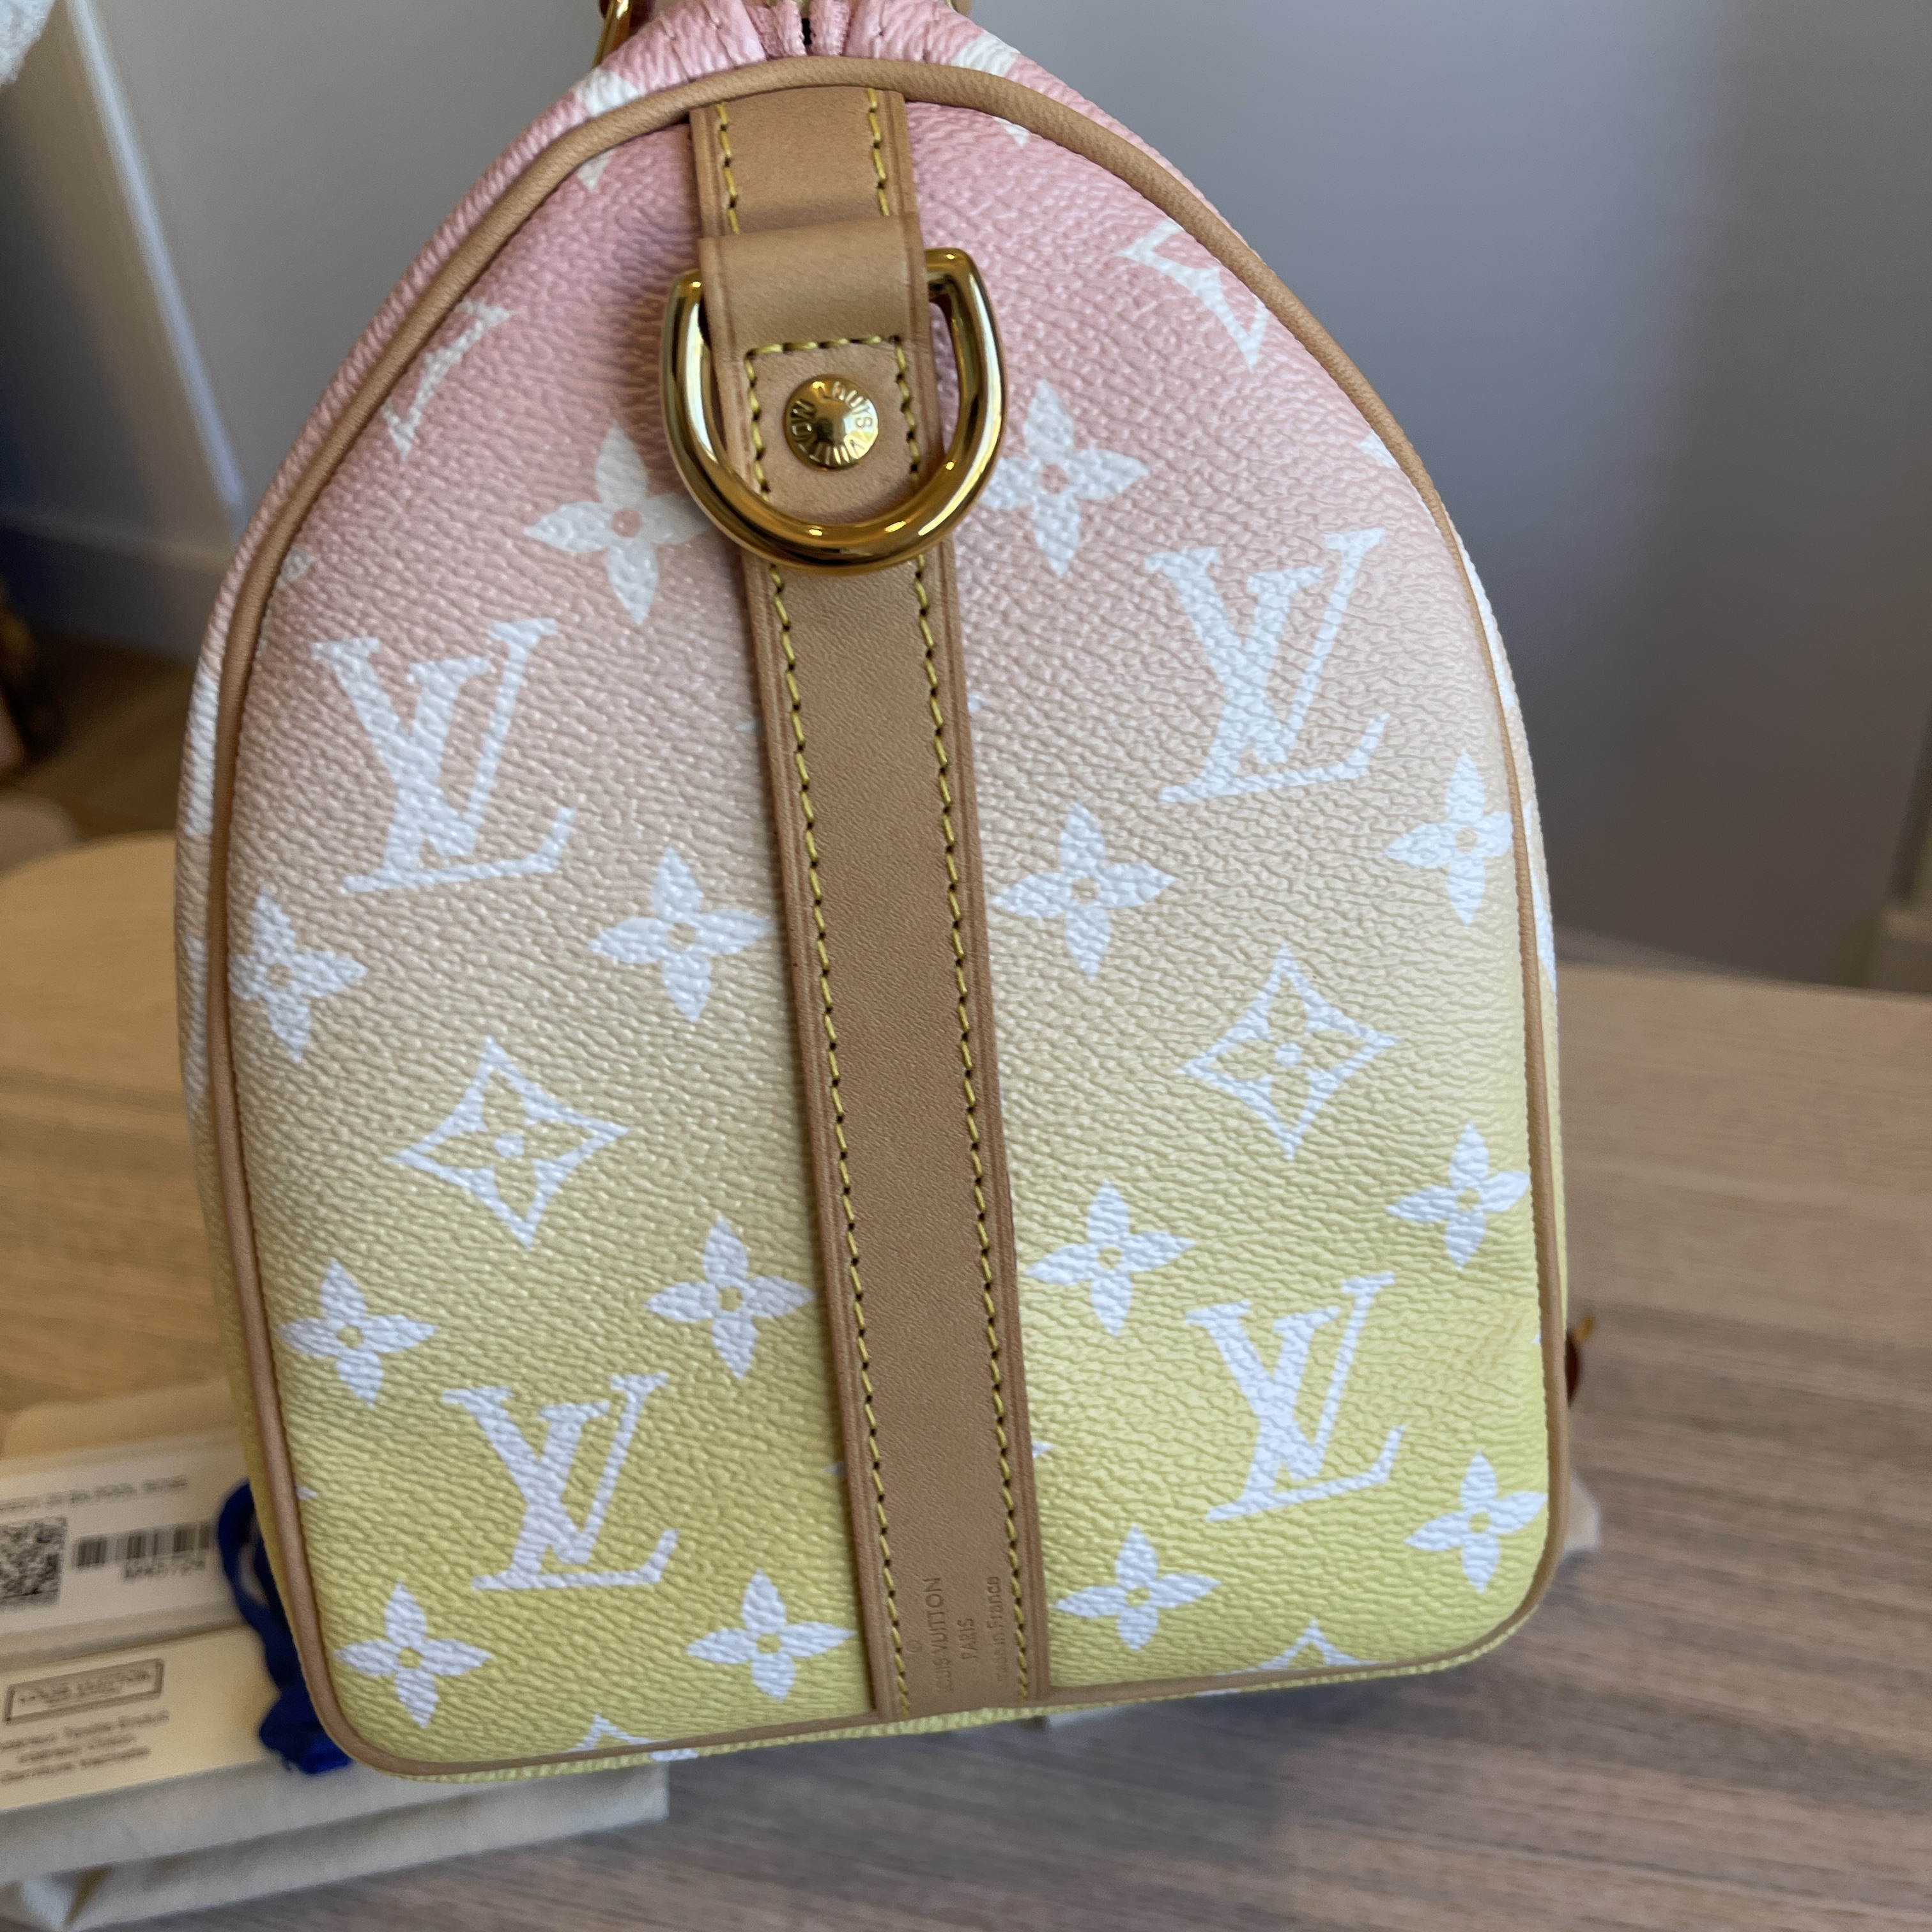 LOUIS VUITTON Speedy 25 Bag Pink M23073 By The Pool Hand Shoulder Purse  Auth LV